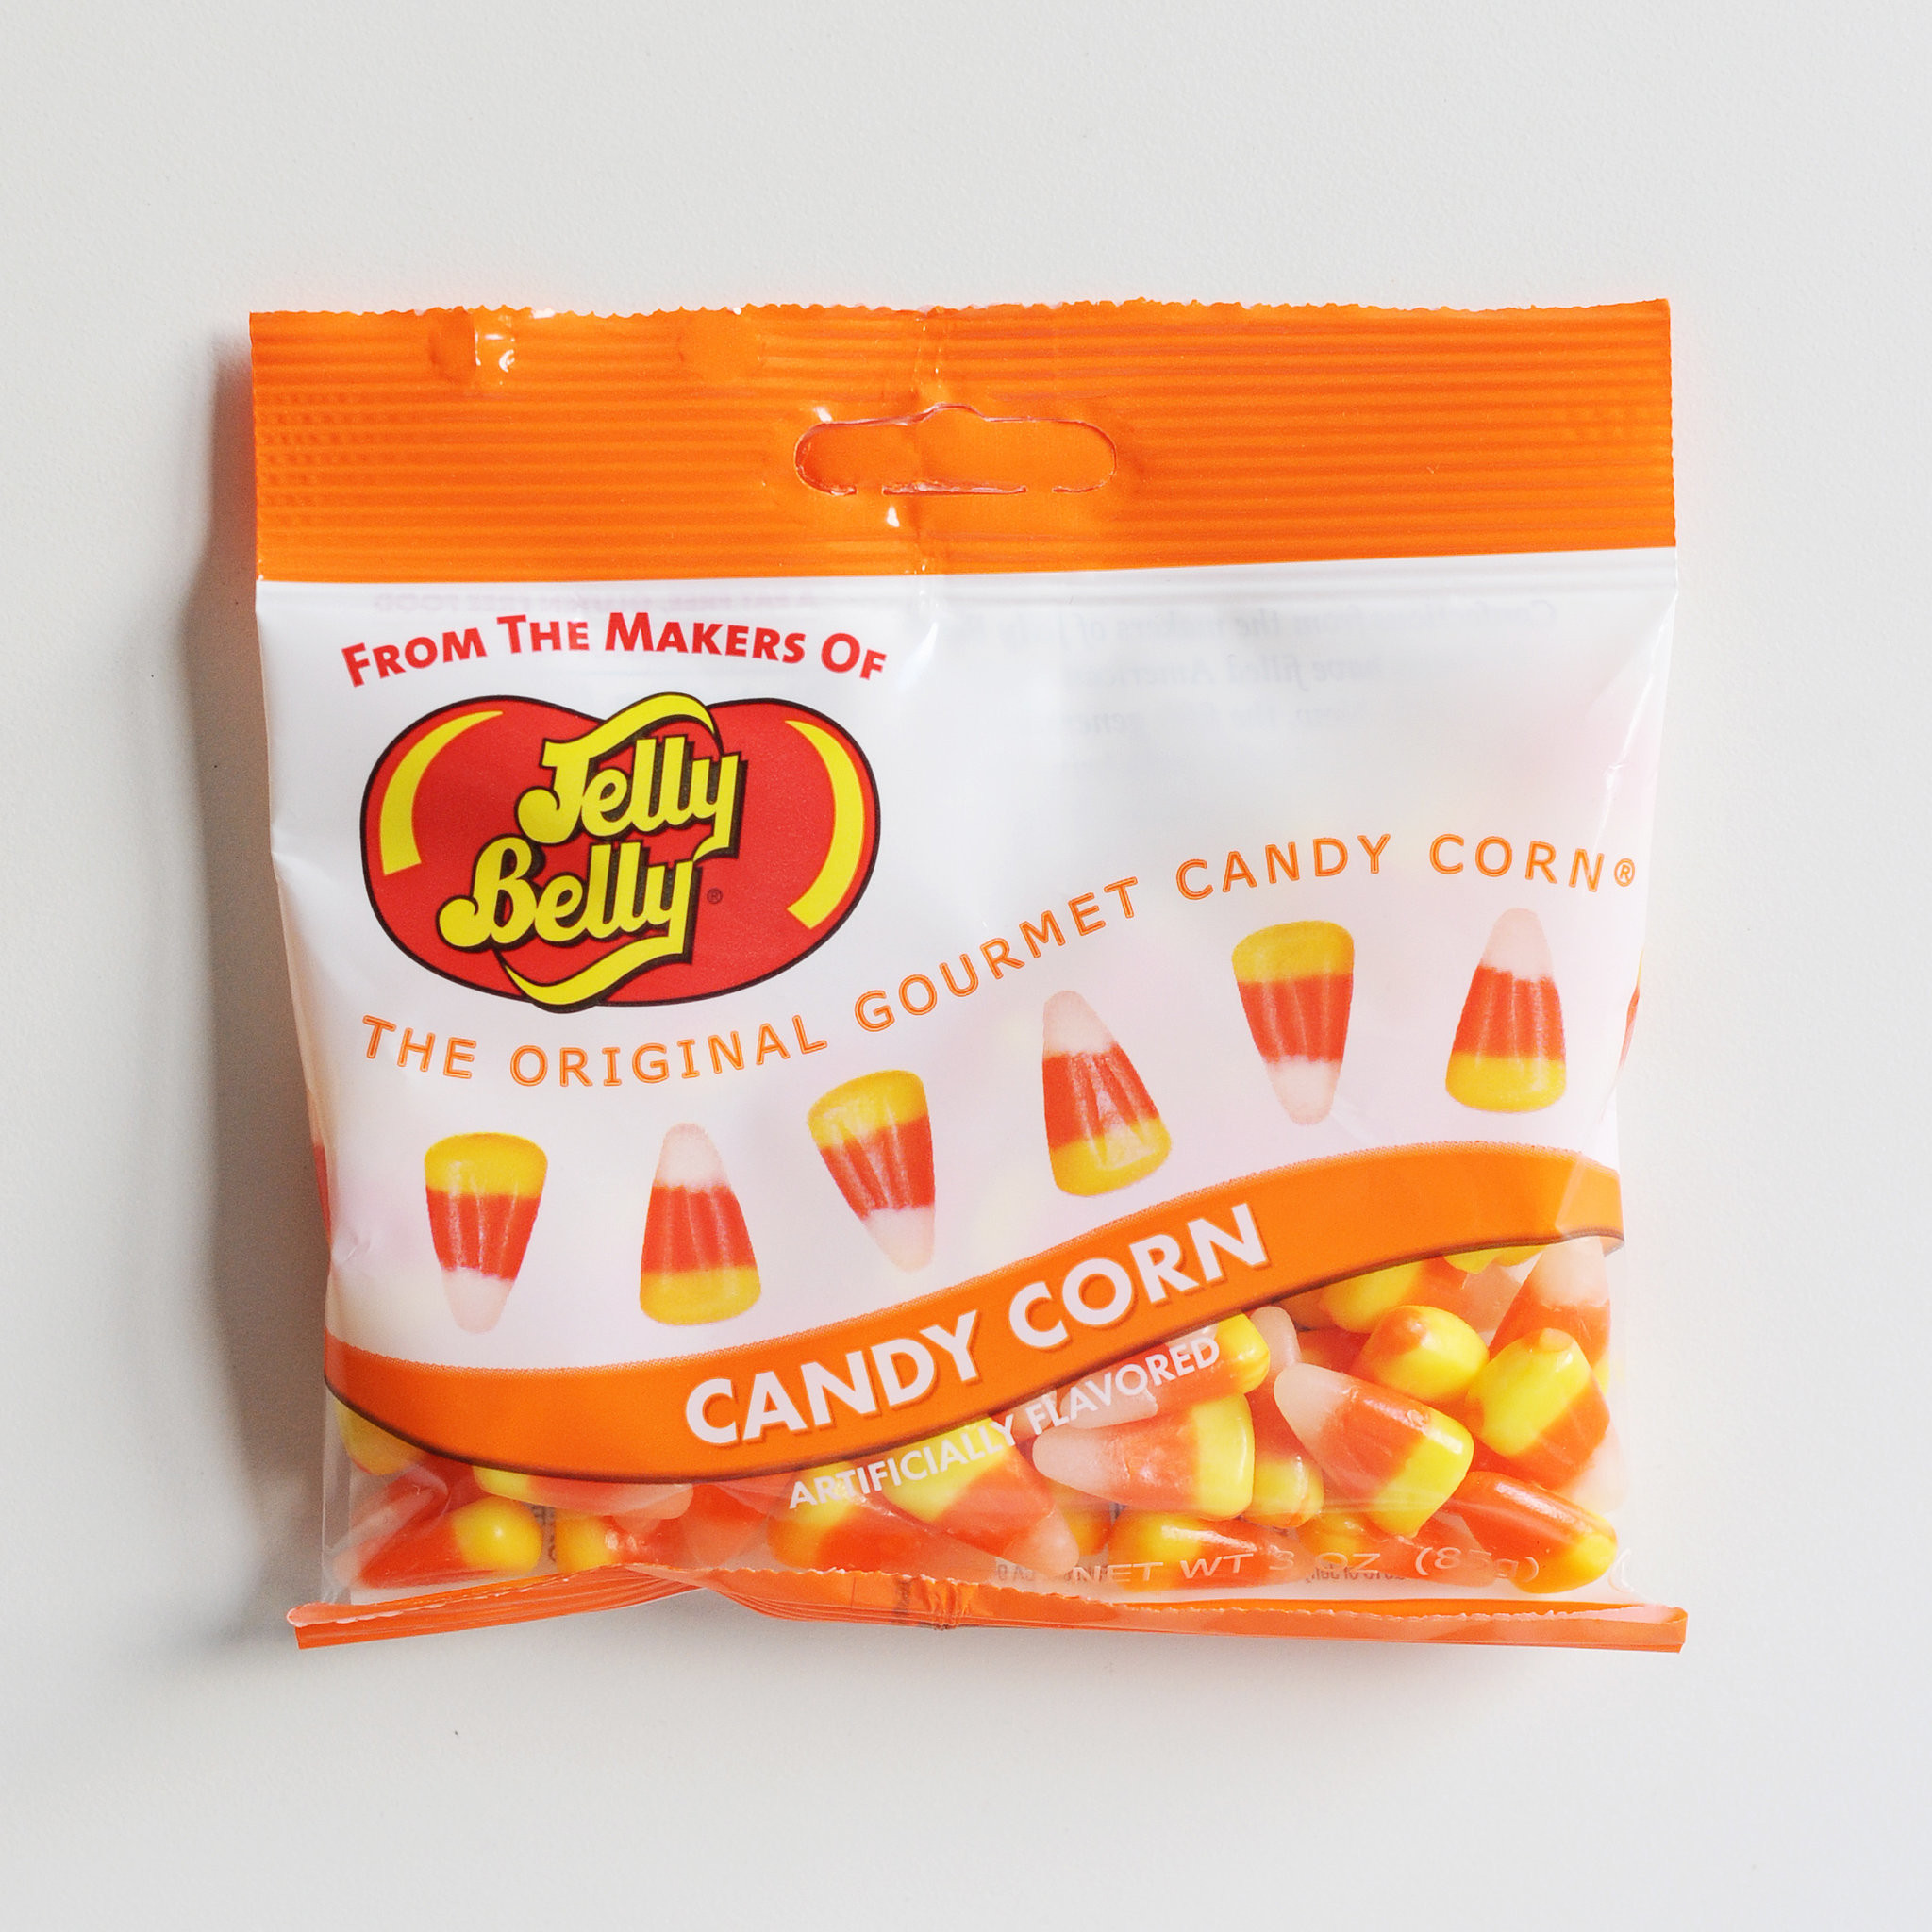 Jelly Belly Candy Corn
 The Best Candy Corn Ranked